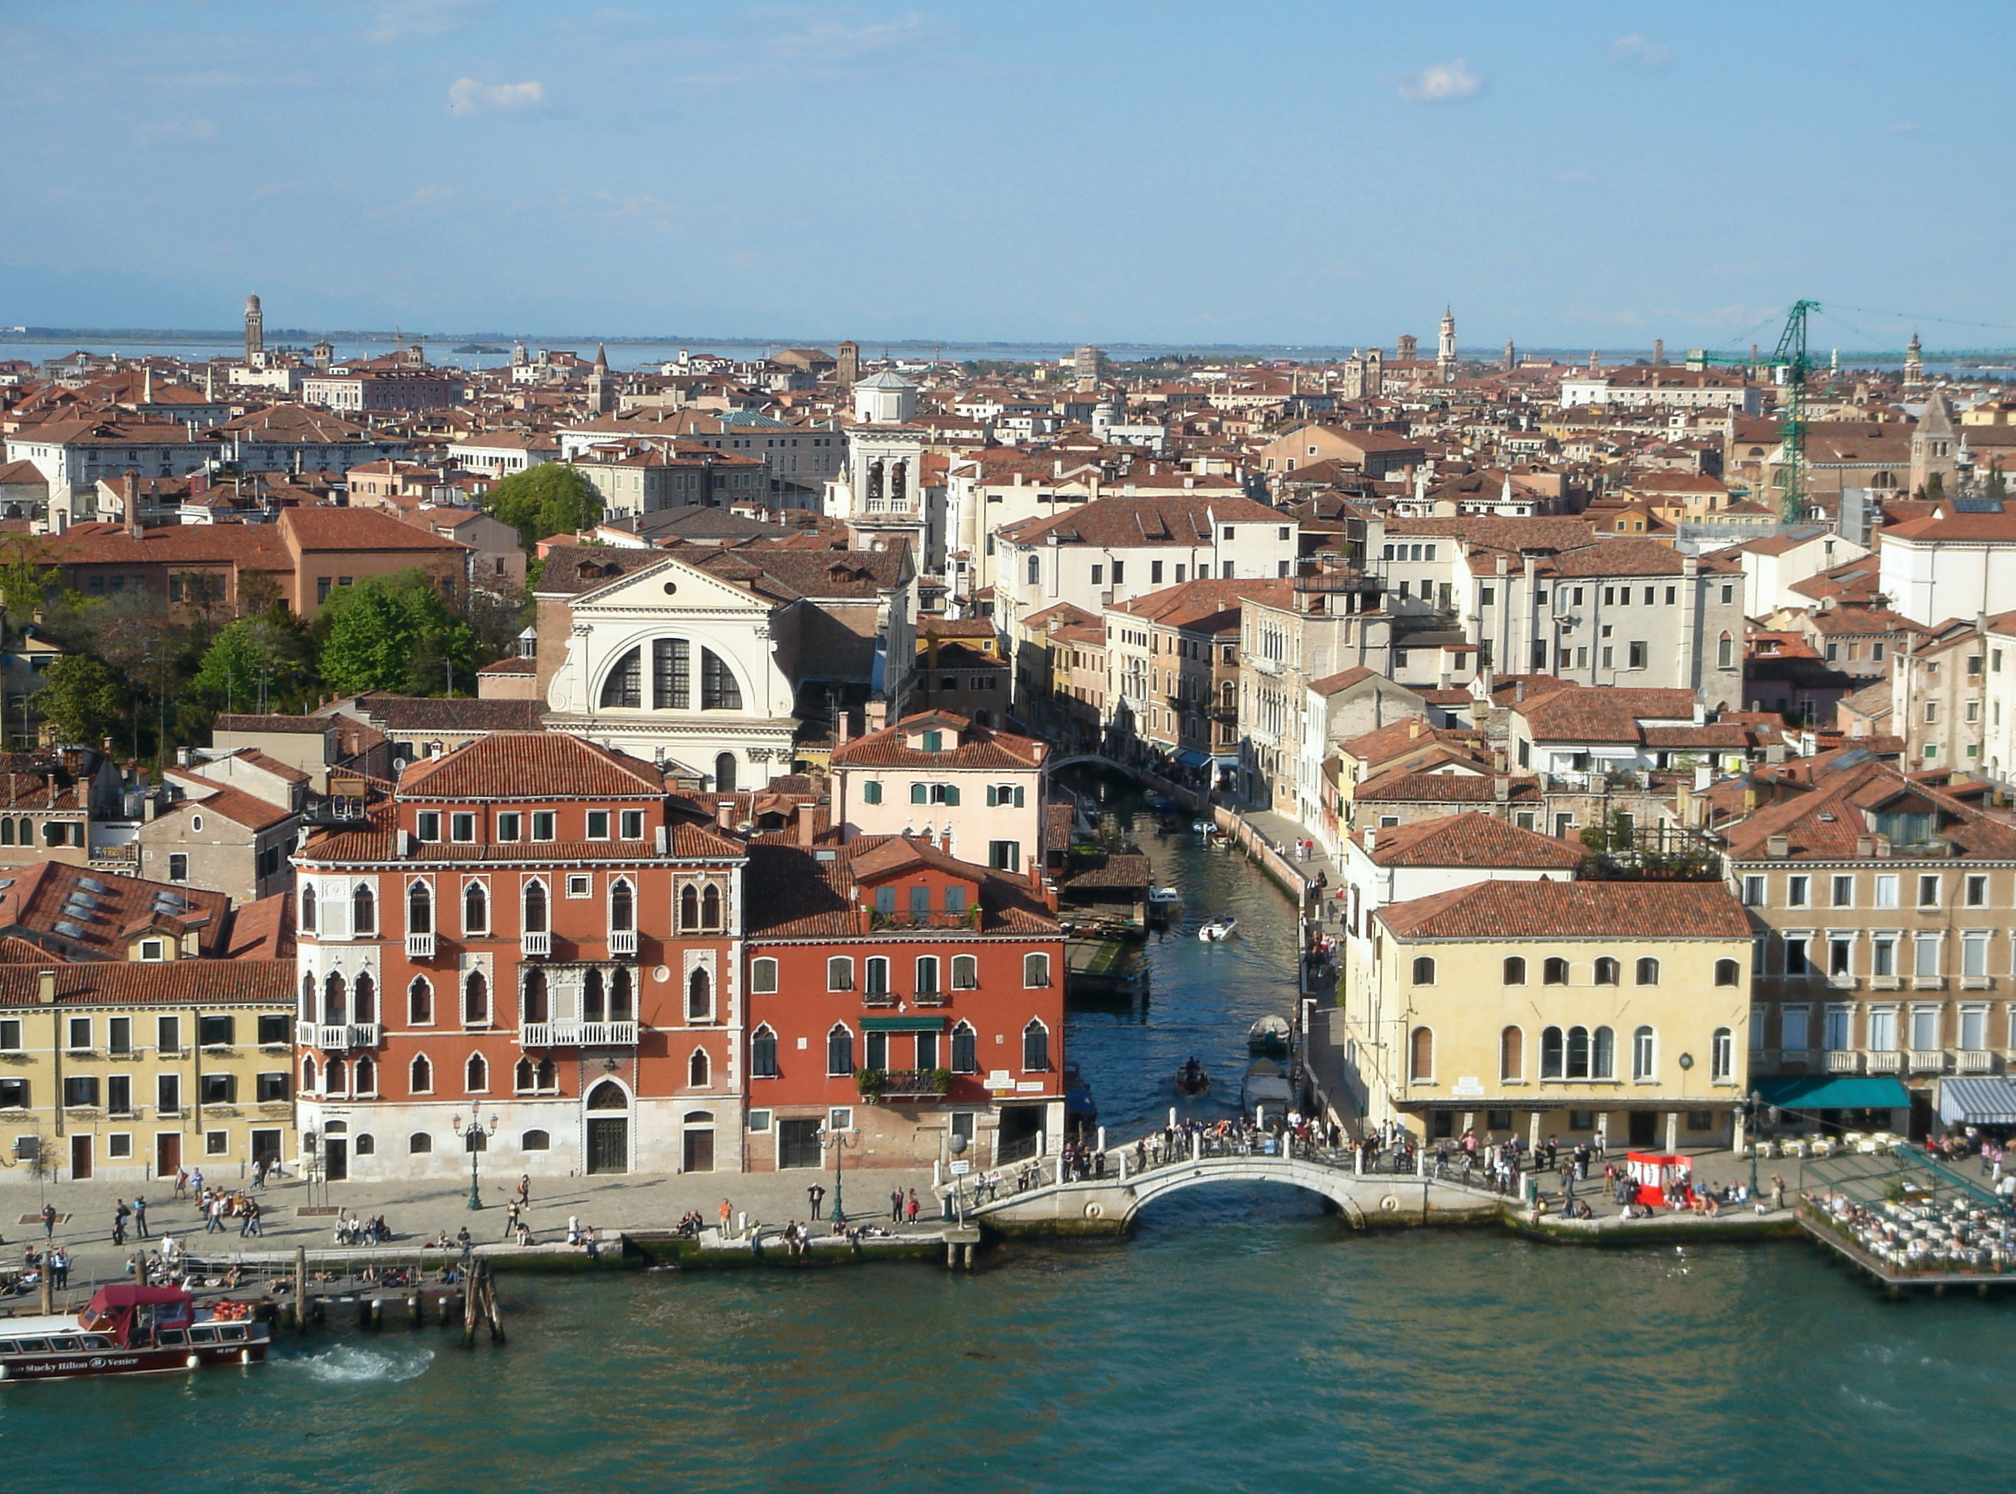 venice-view-from-ship-3-2008.jpg